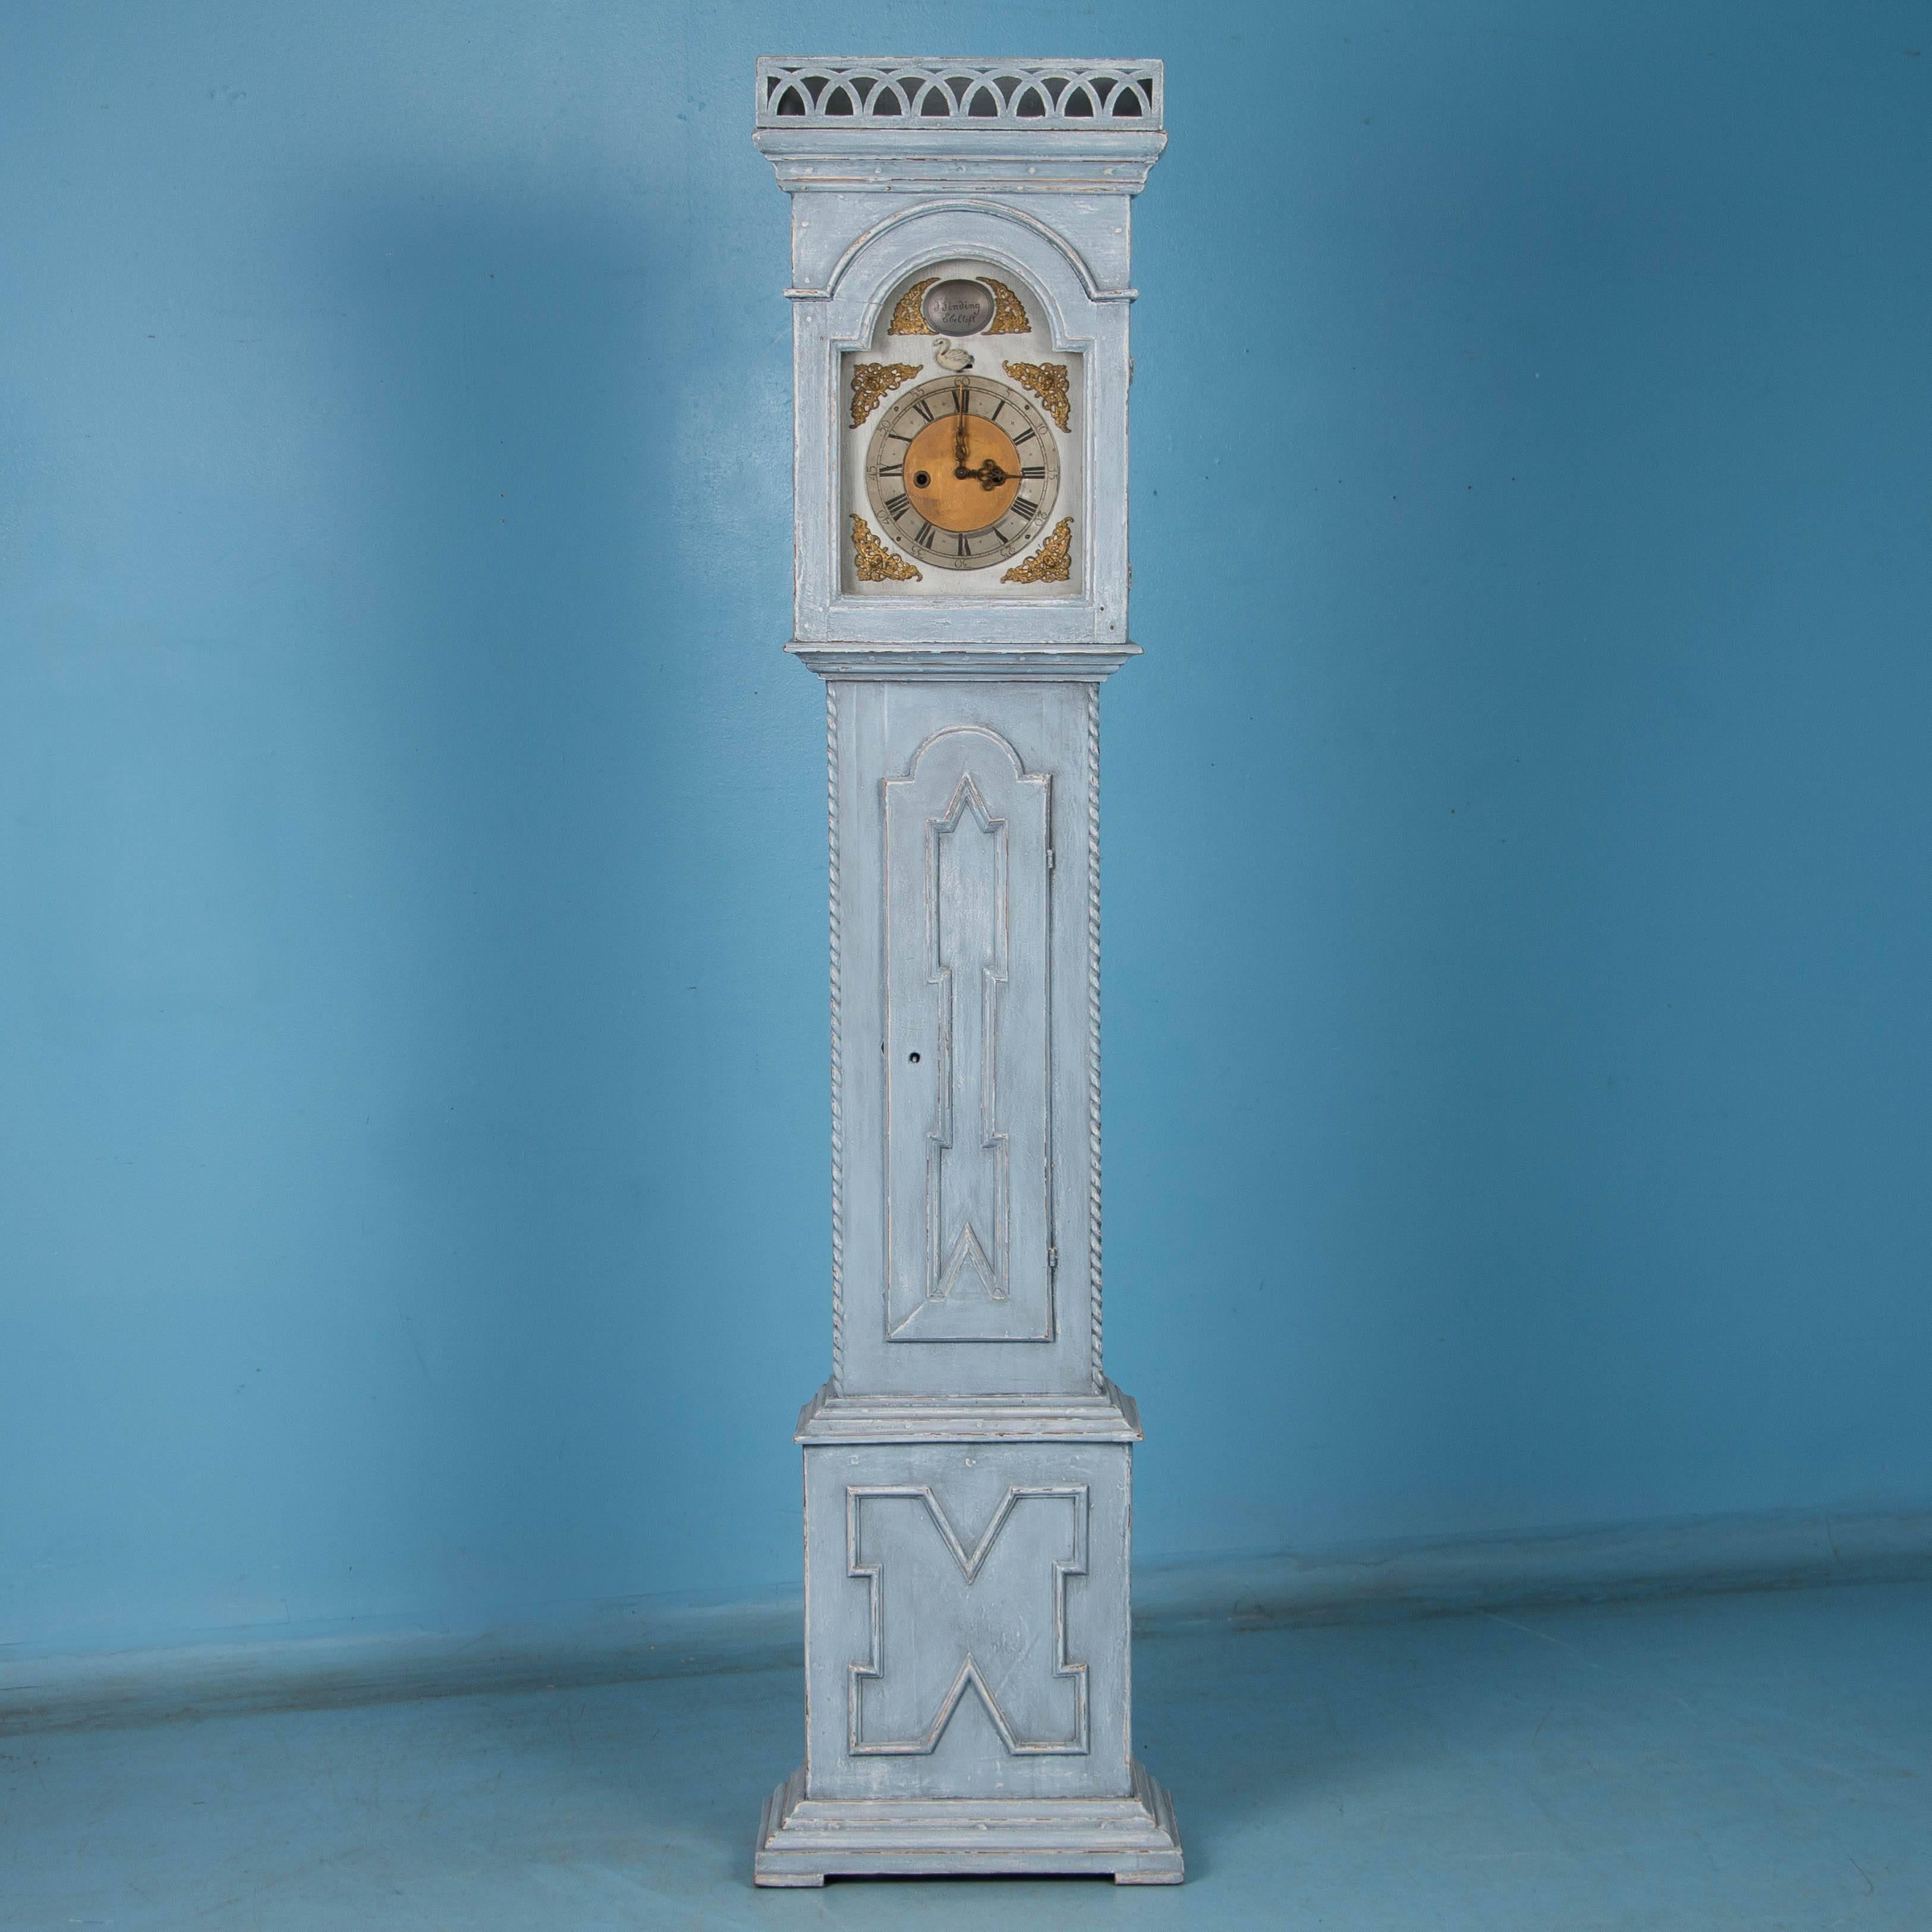 The wonderful proportions, color and carved molding of this striking antique grandfather clock are revealed in the Danish craftsmanship. Please examine the close up photos to appreciate the distressed light blue painted finish which compliments the